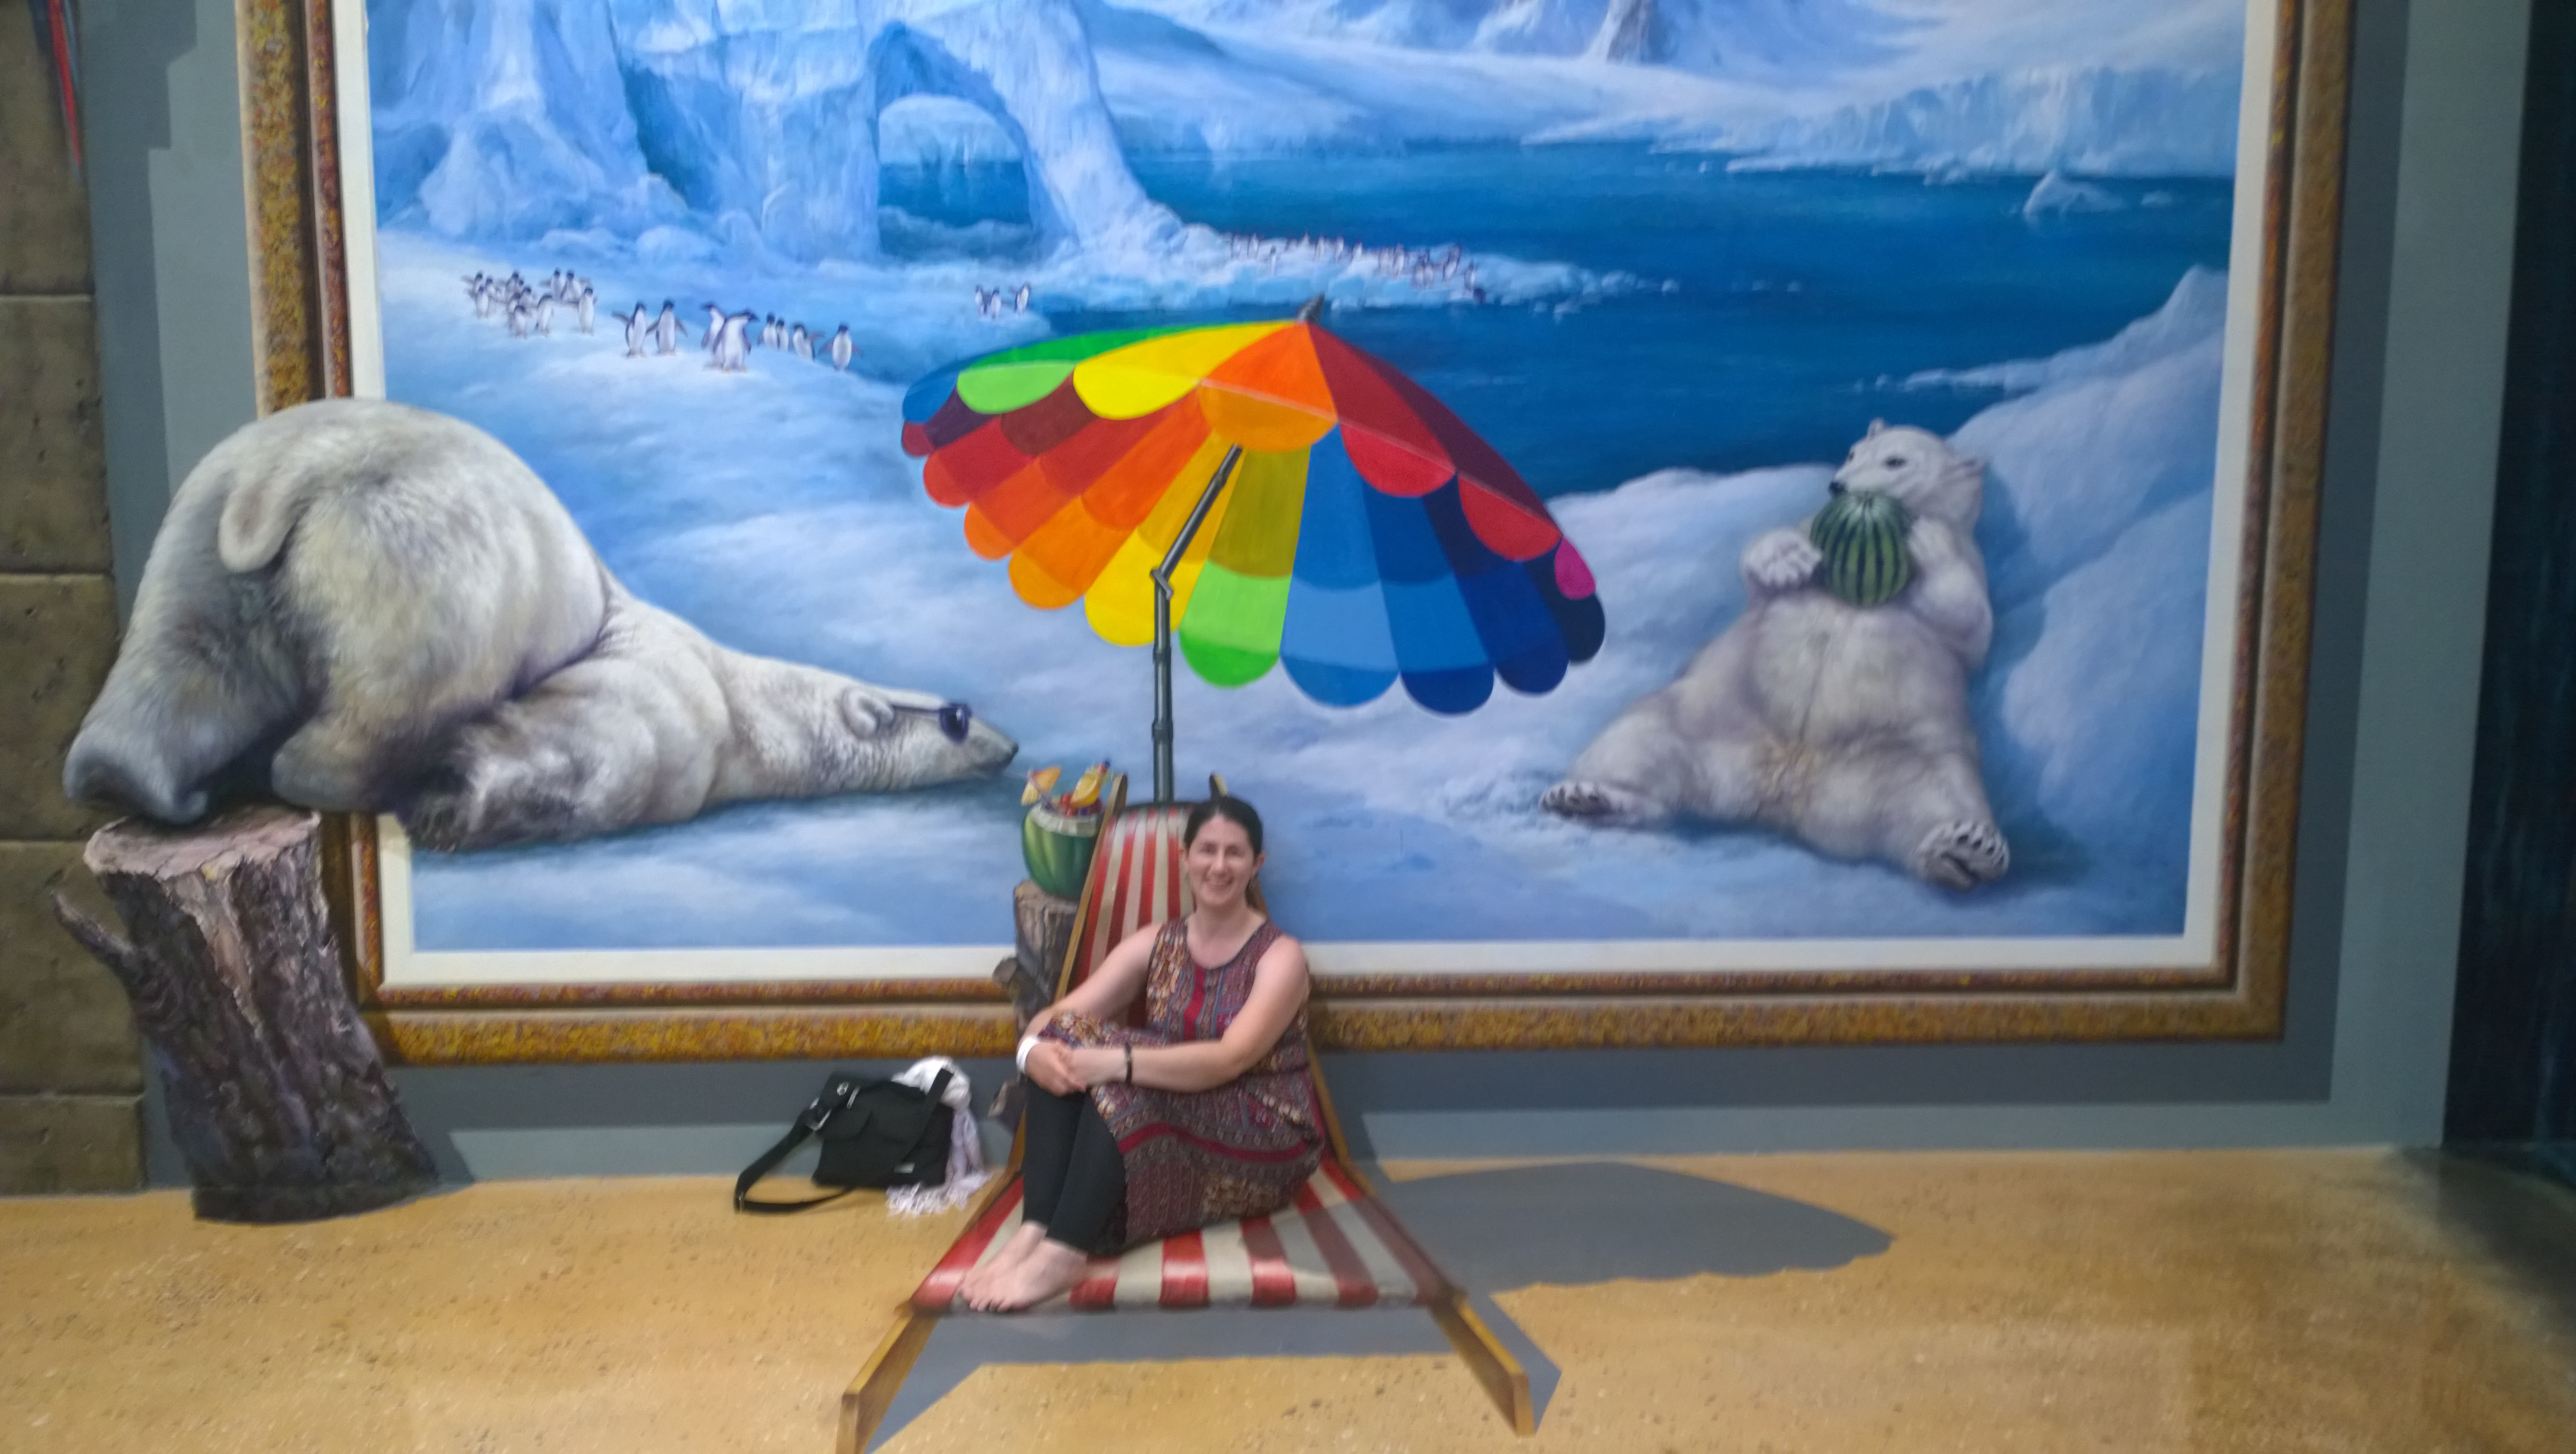 3D art museum Langkawi- hanging out with polar bears